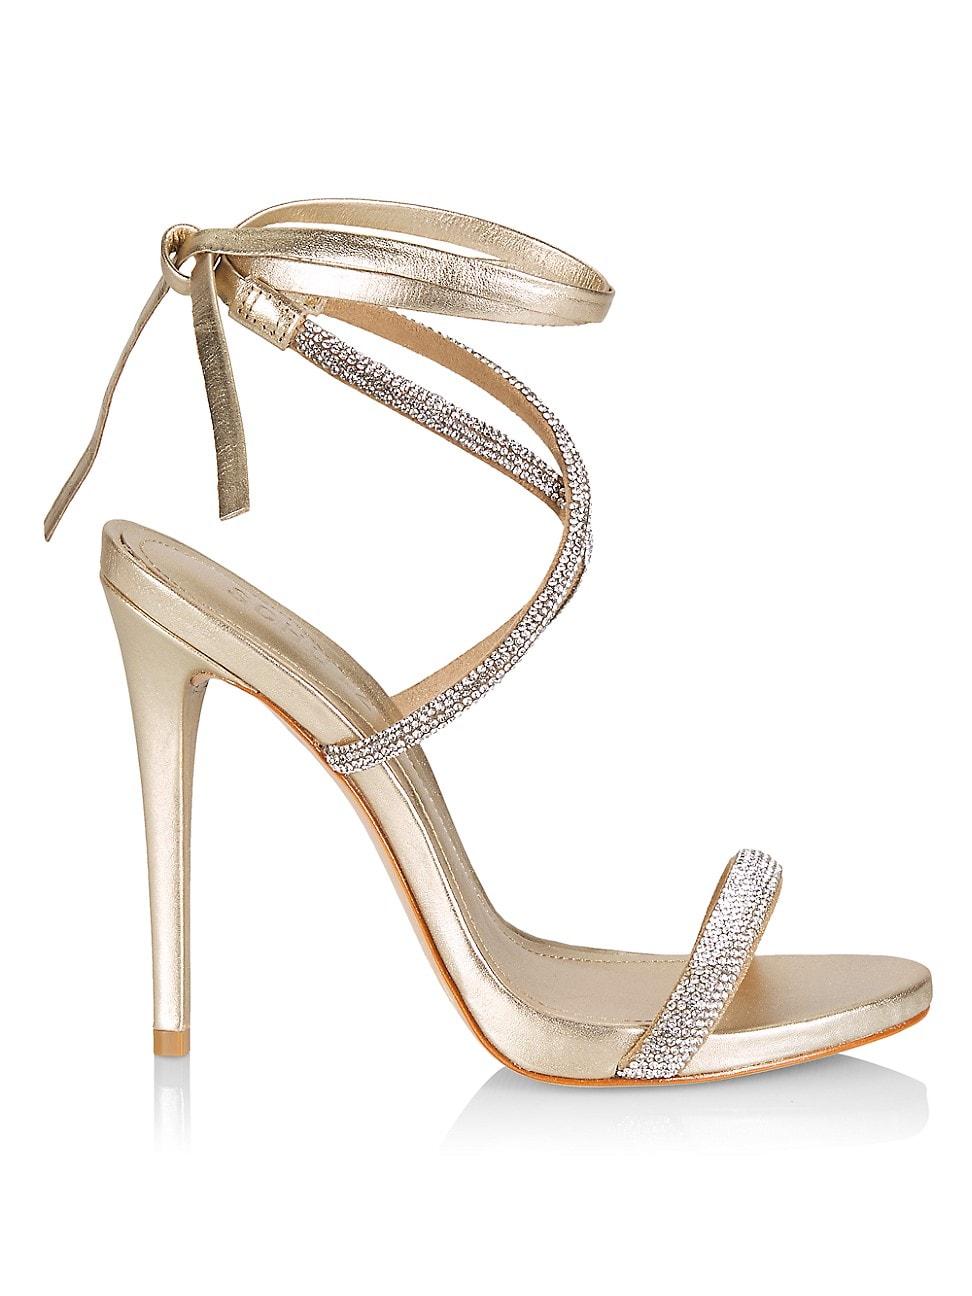 SCHUTZ SHOES Cloe Crystal-embellished Lace-up Sandals in Metallic | Lyst